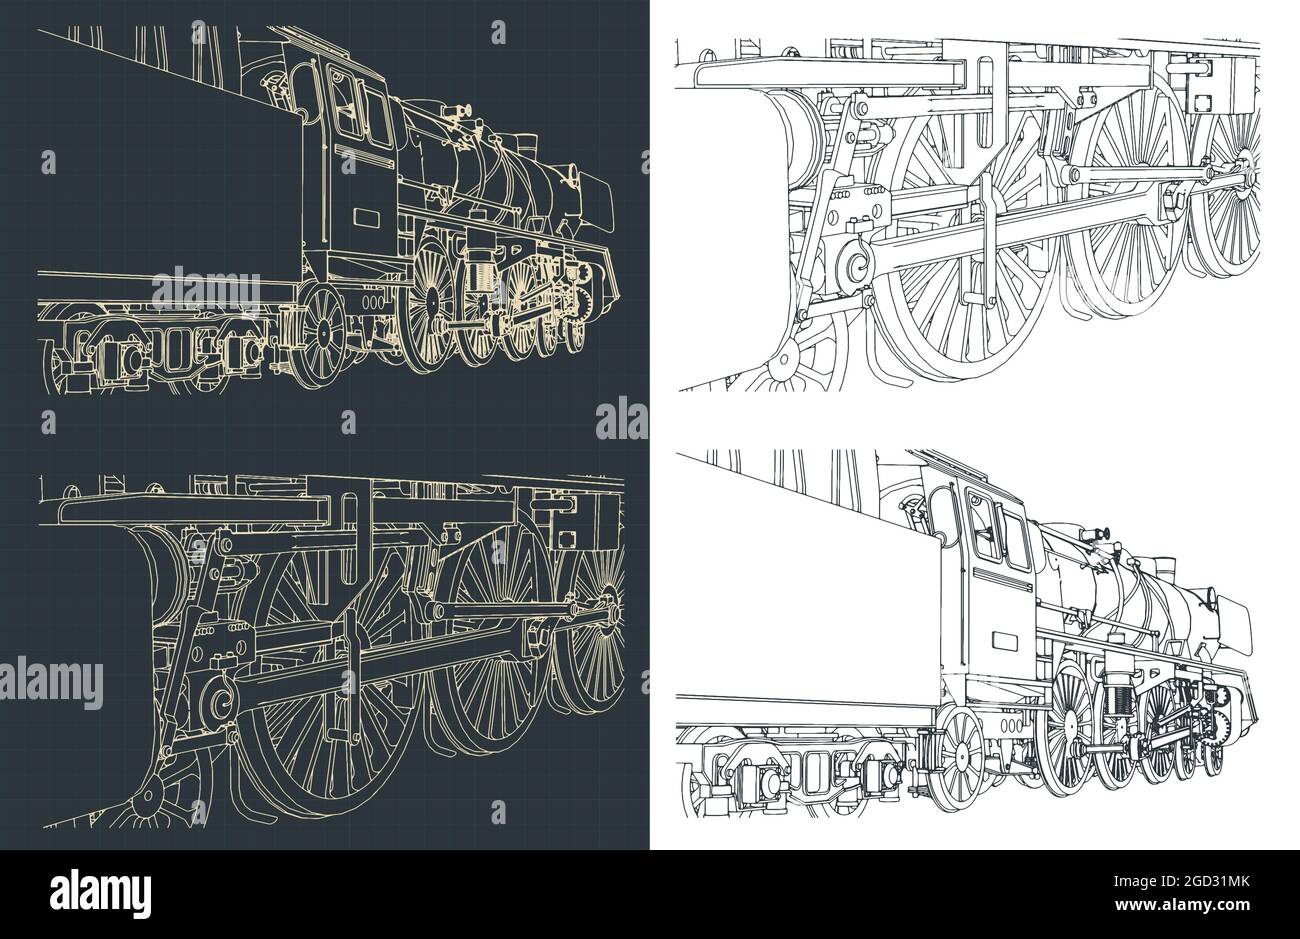 Stylized vector illustration of drawings of steam locomotive close-up Stock Vector